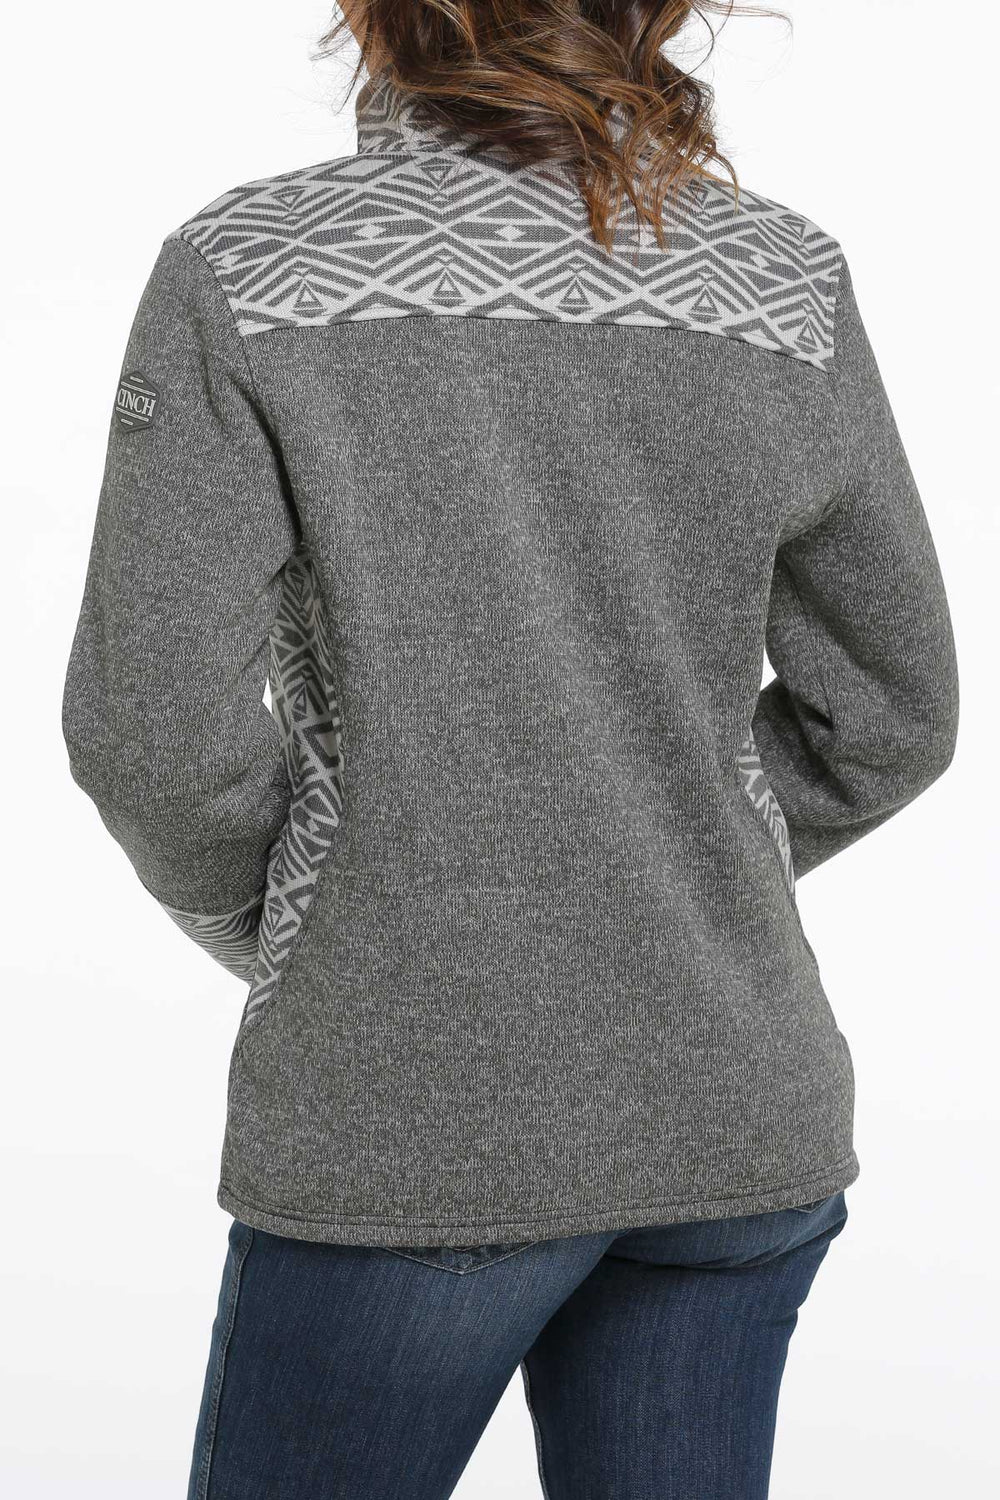 Back SideCinch | Ladies Charcoal Color Blocked Sweater Jacket